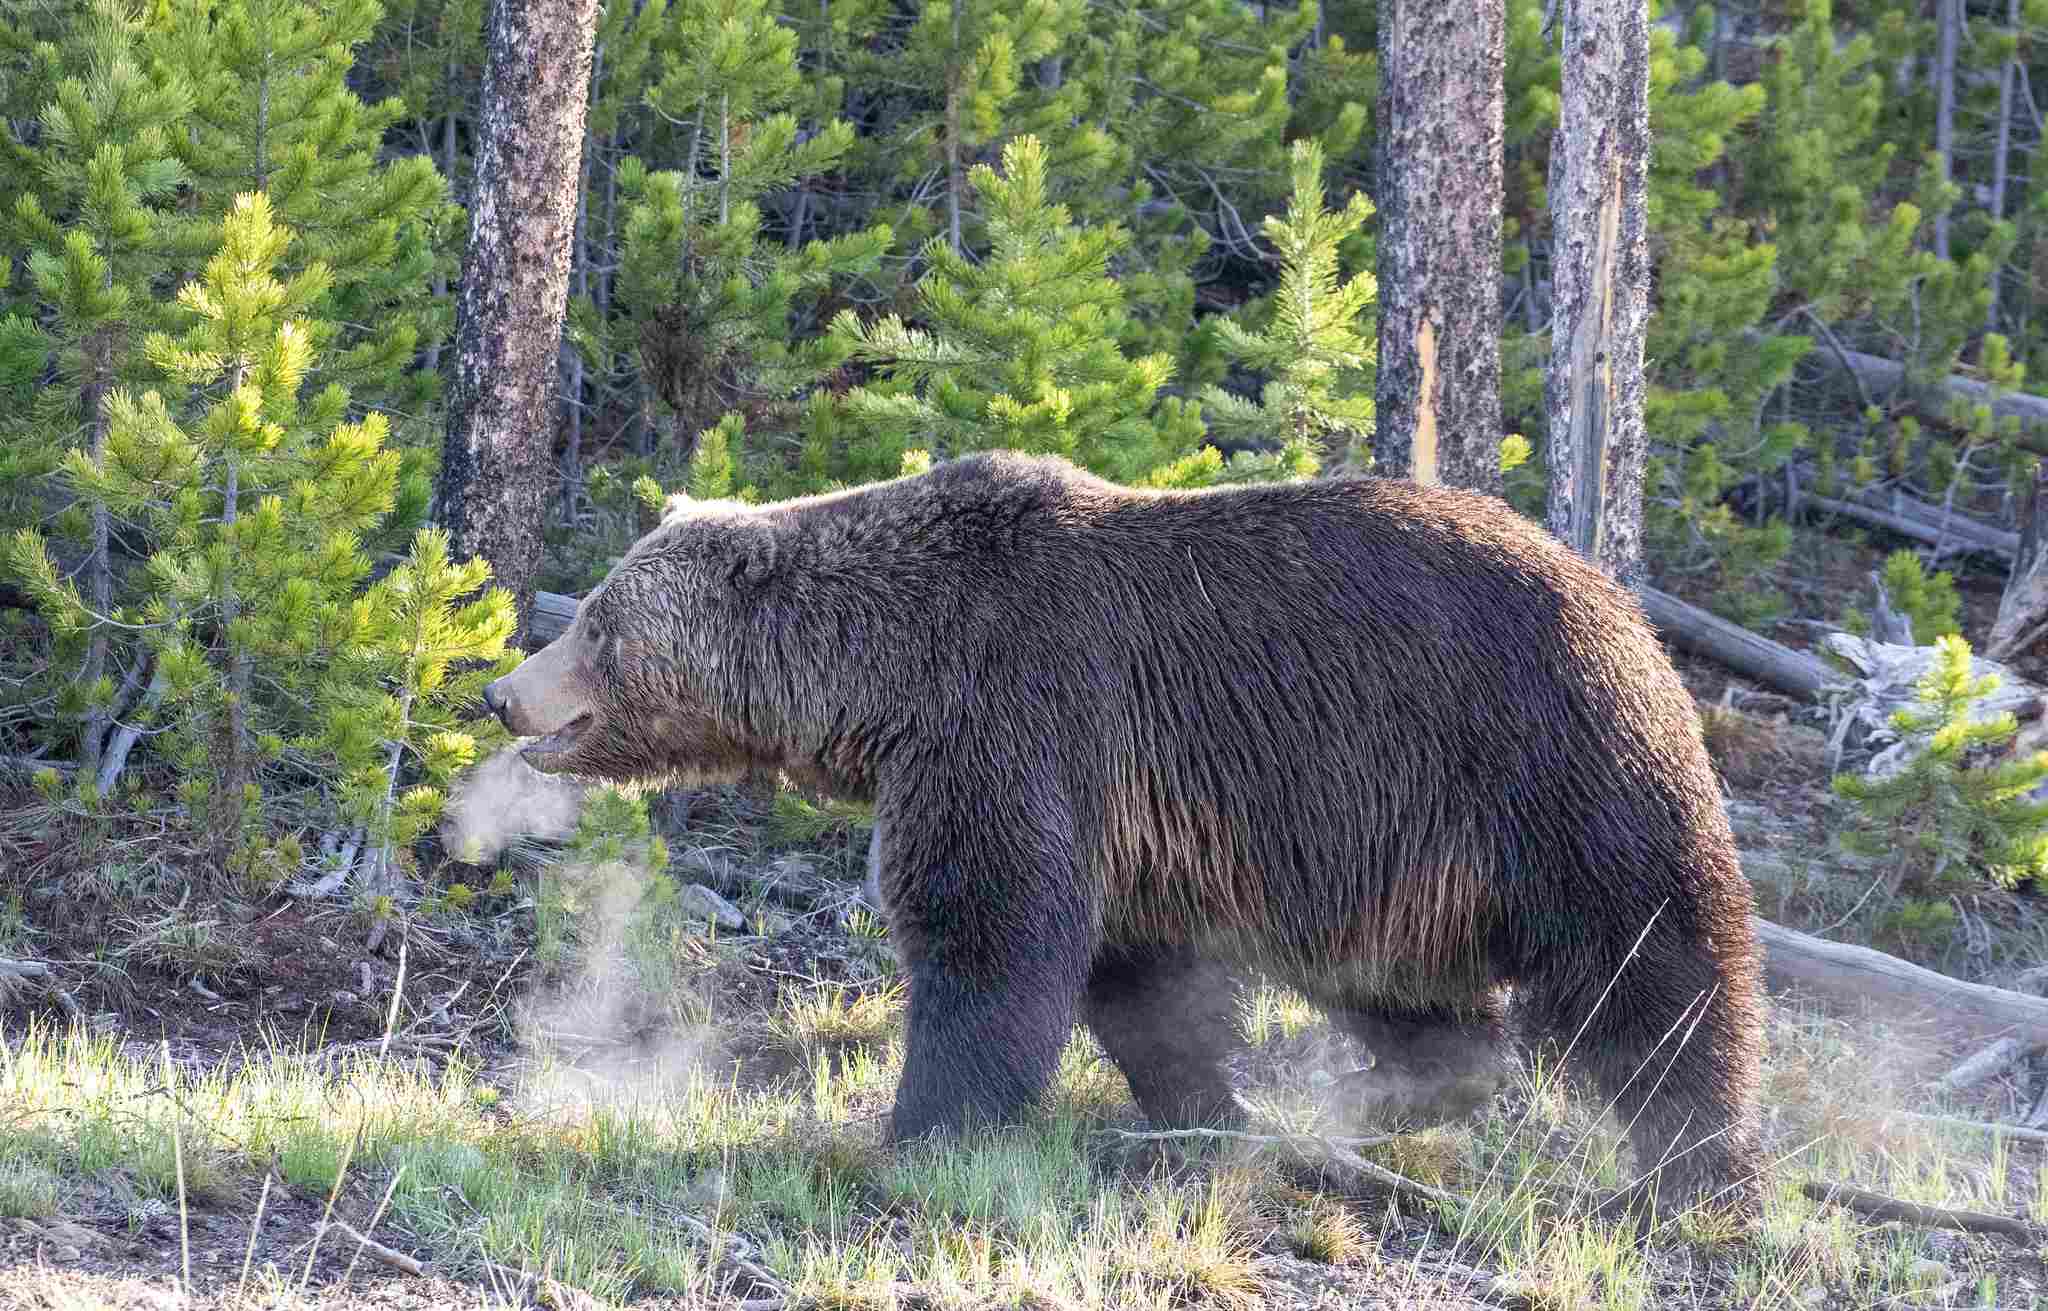 Biotic Factors in Yellowstone National Park: Omnivores in Yellowstone Include Grizzly Bears and Badgers (Credit: Yellowstone National Park 2020)